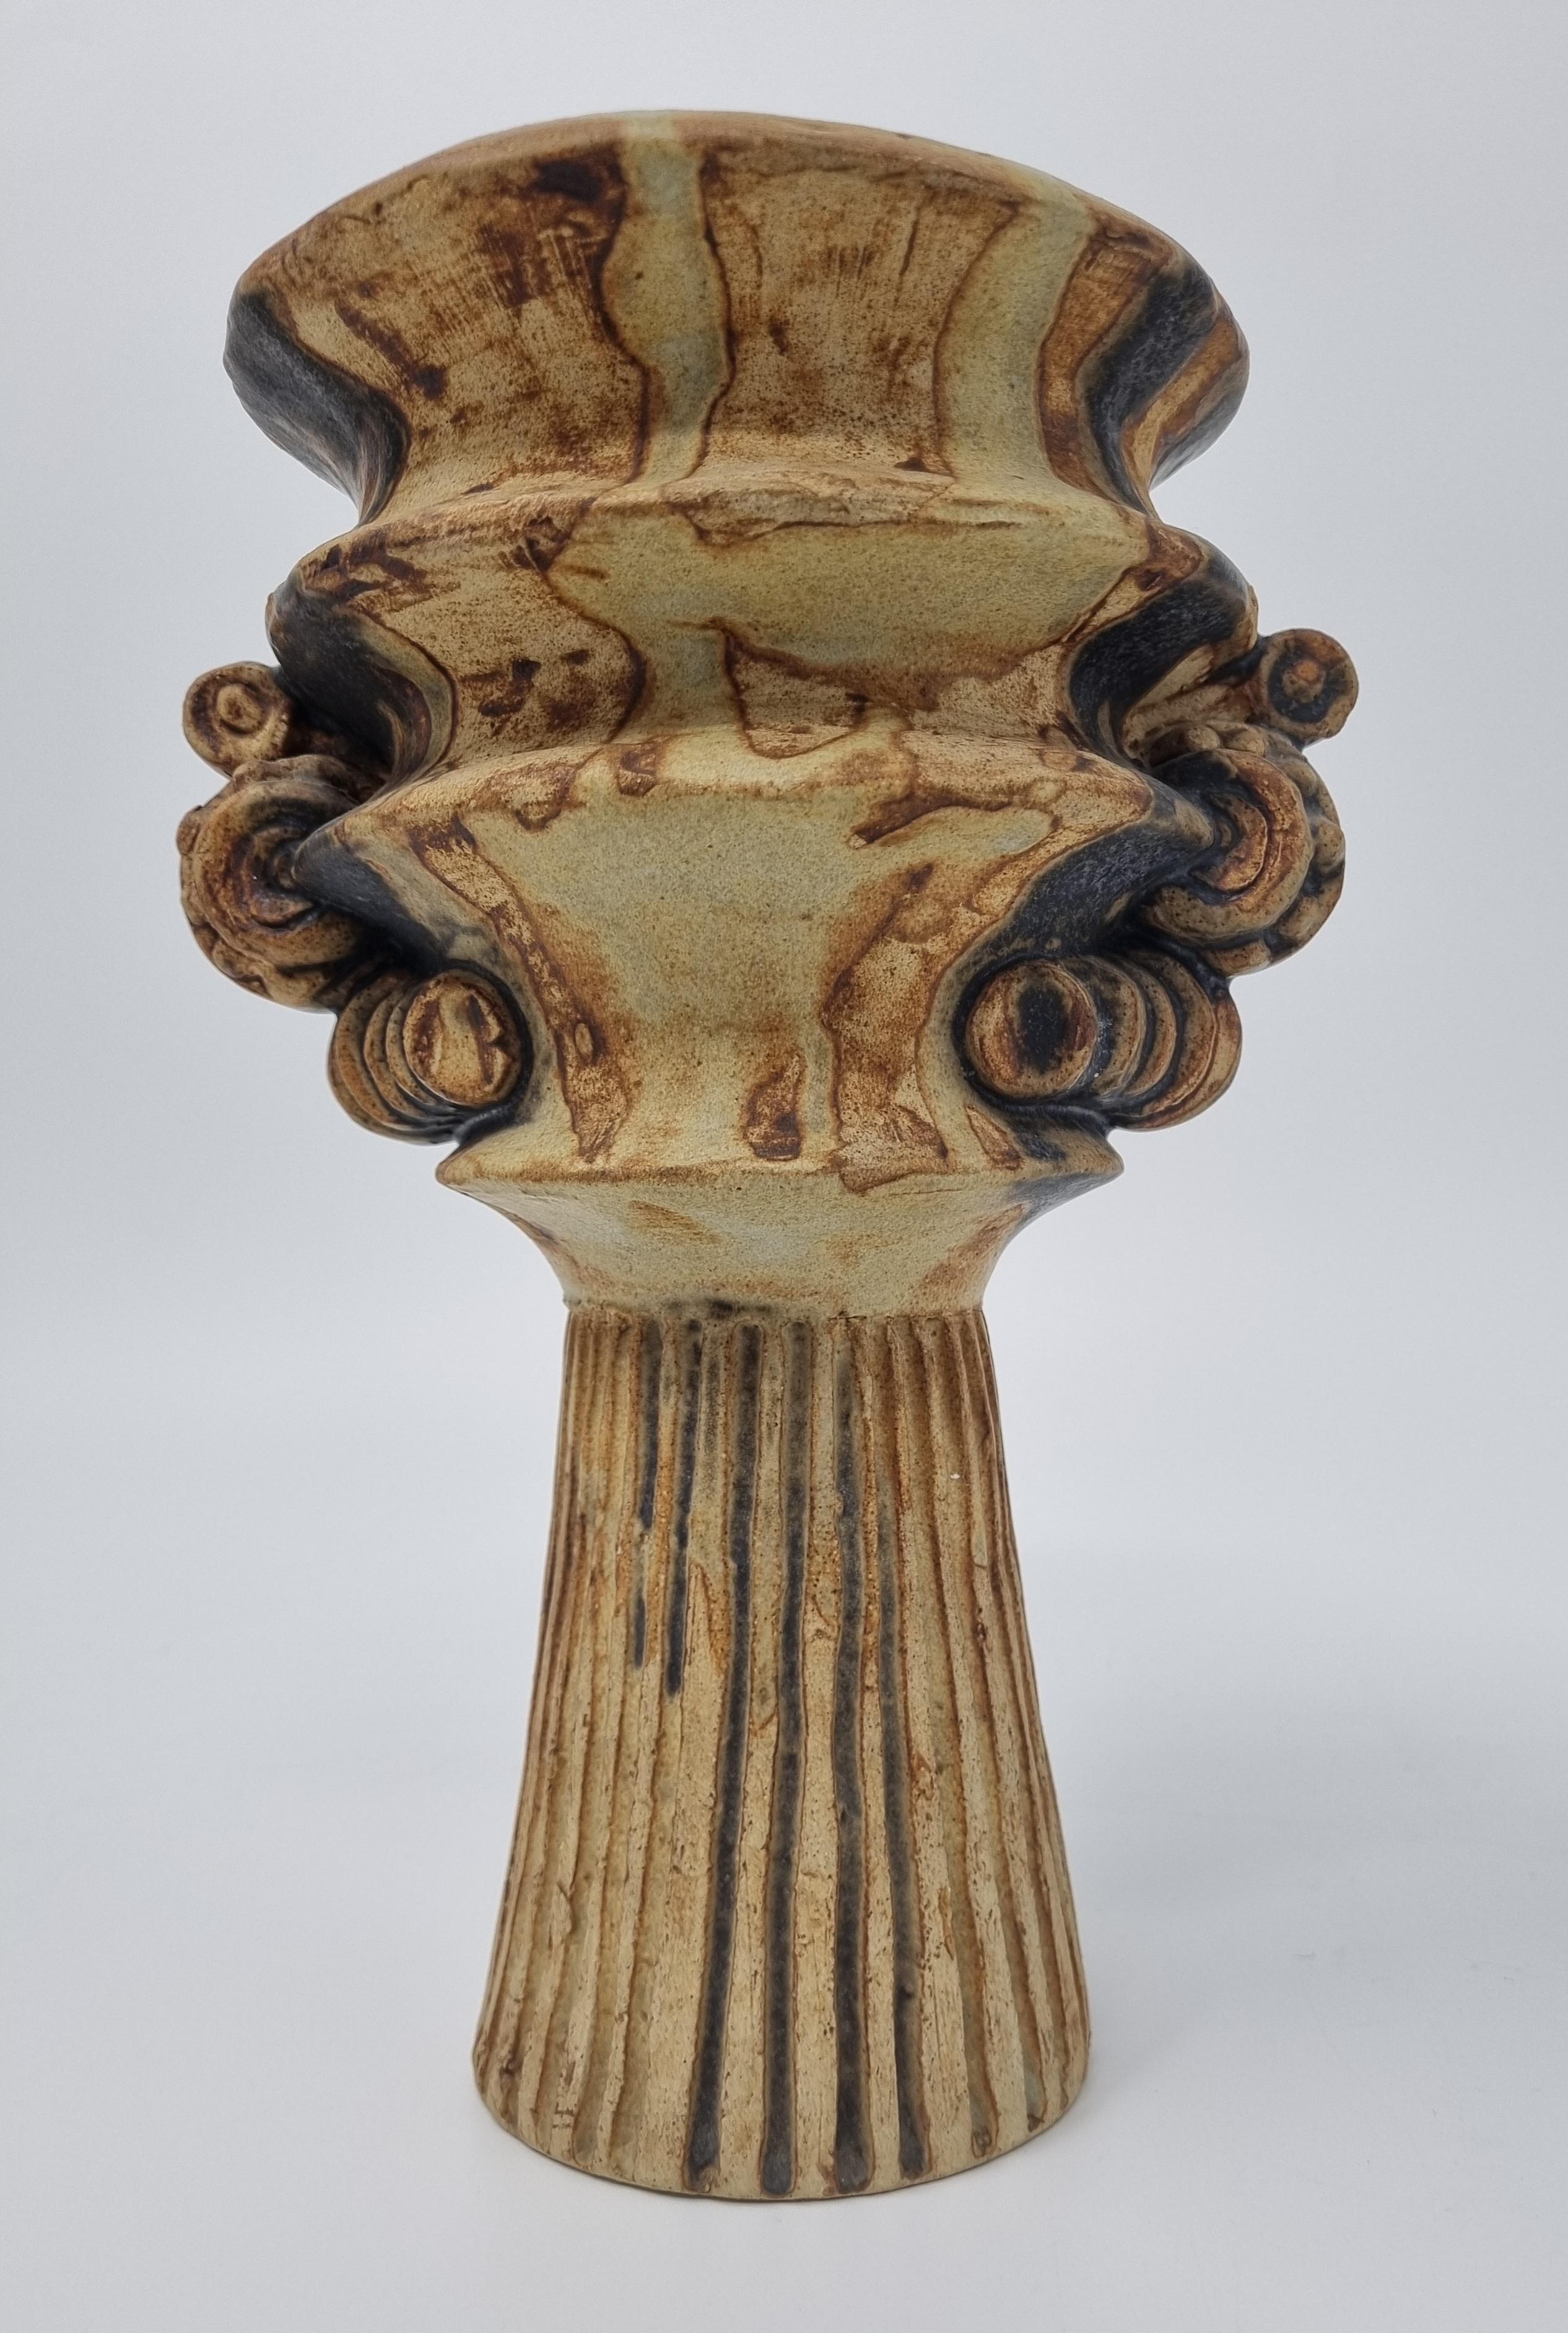 Bernard Rooke Studio Pottery Chalice is a rare vintage example from the 1960s. Made by the renowned British artist and potter, Bernard Rooke, this piece is a true testament to his artistic brilliance and mastery of the medium.

Bernard Rooke's